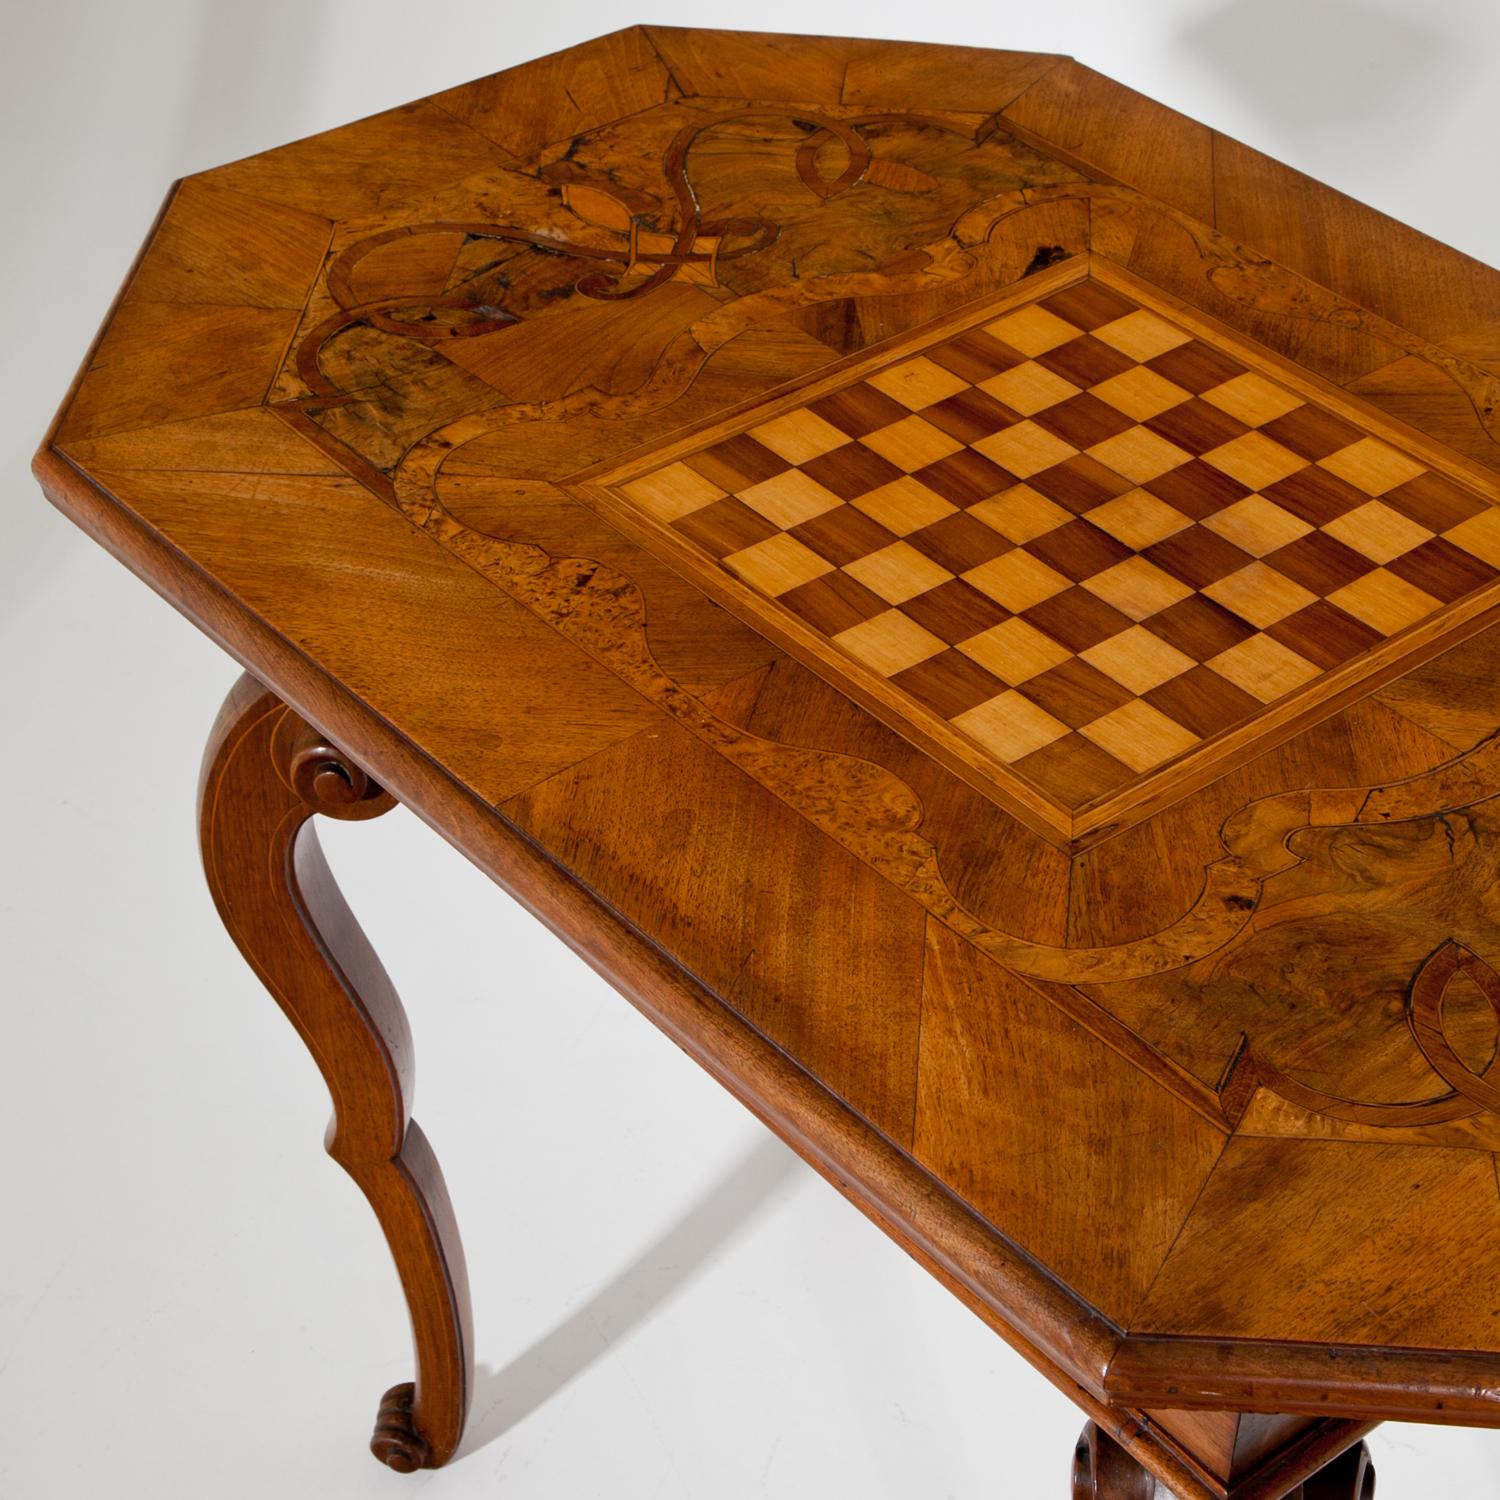 Baroque Table, Late 18th-Early 19th Century (Barock)